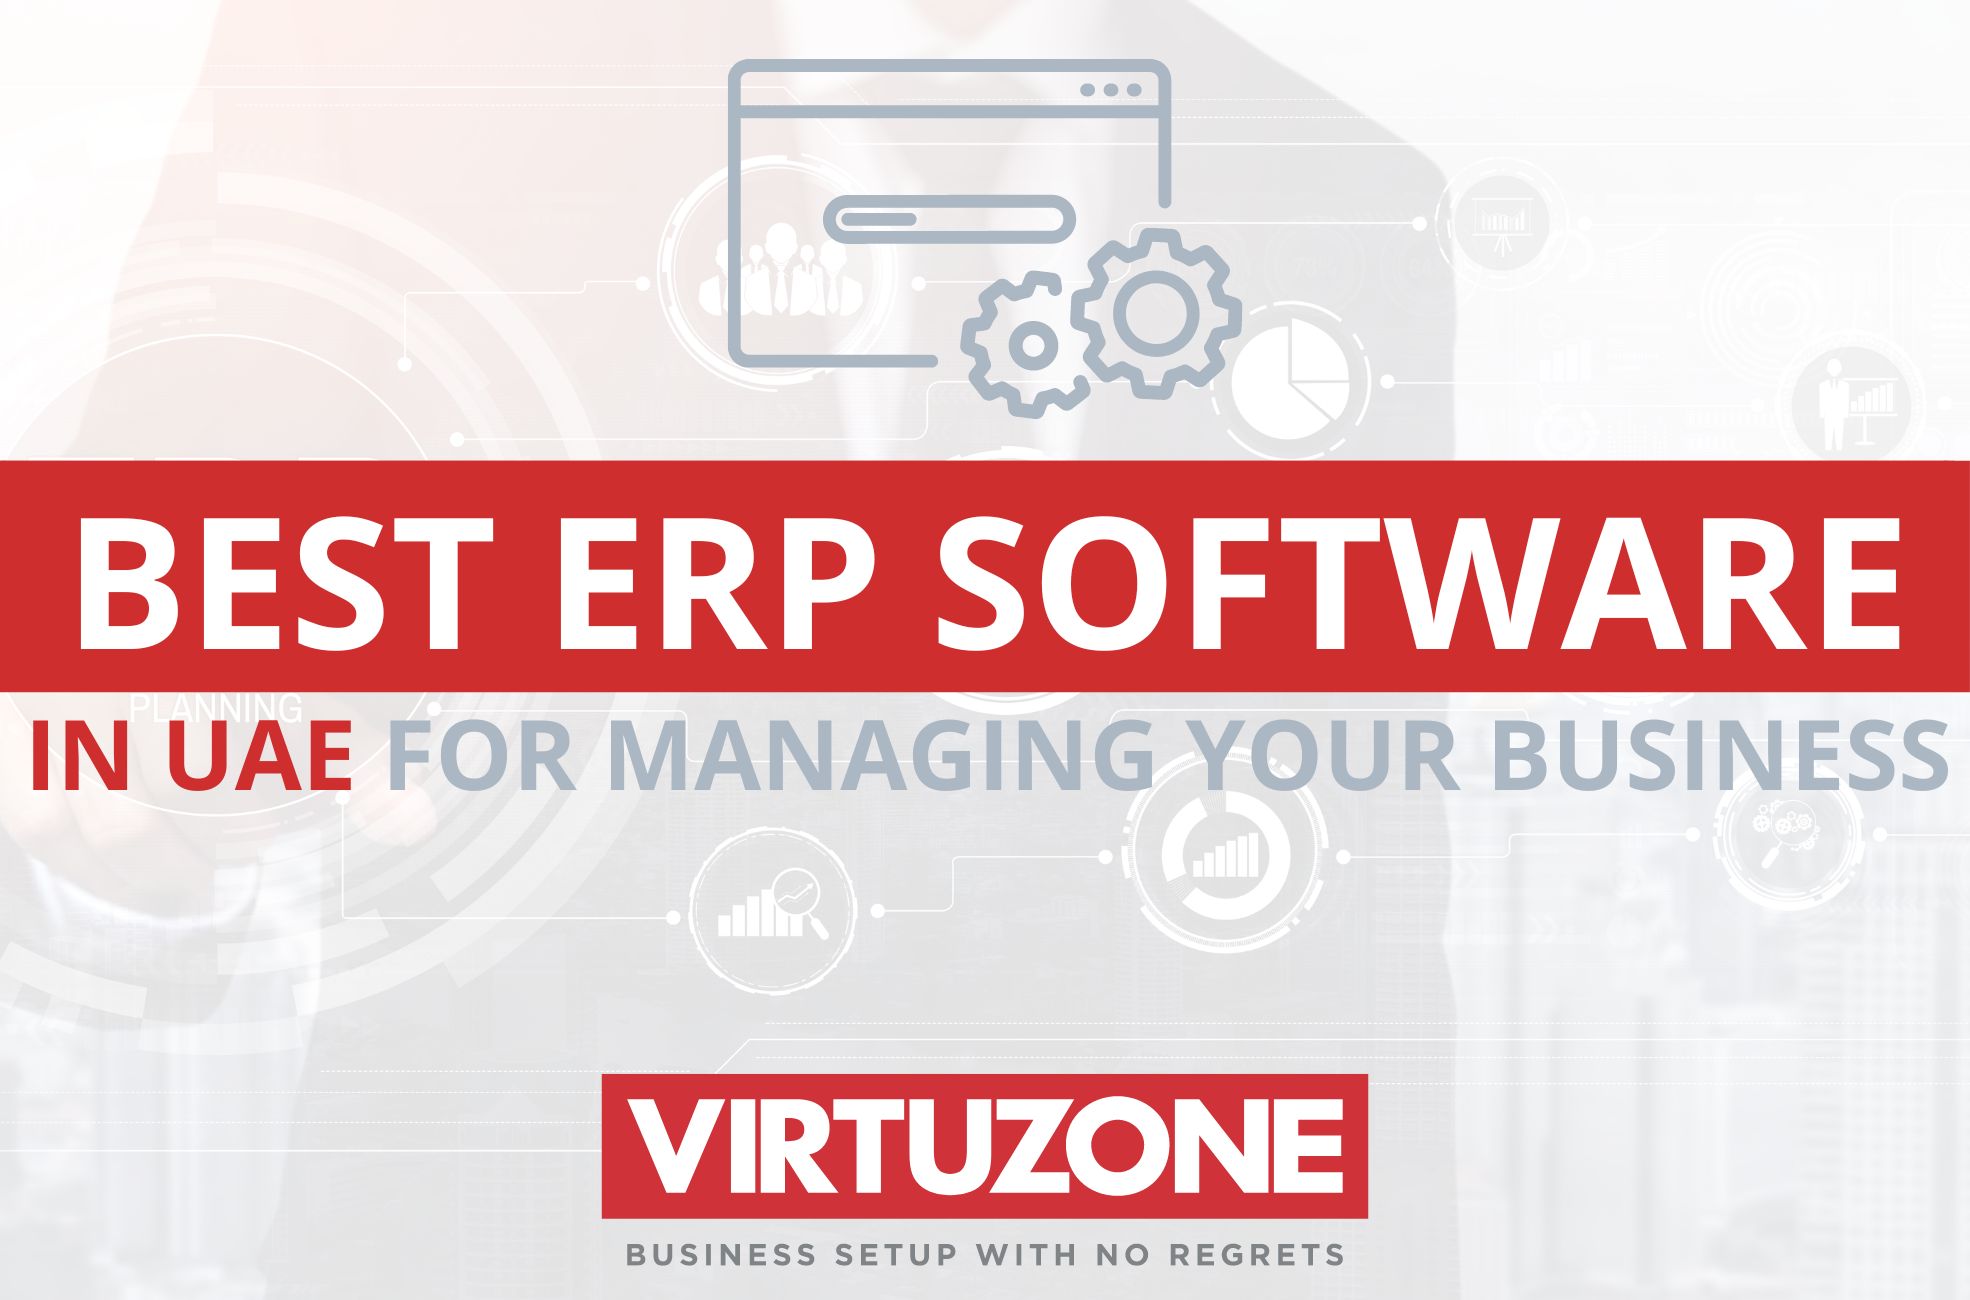 Best ERP Software In UAE for Managing Your Business - Virtuzone